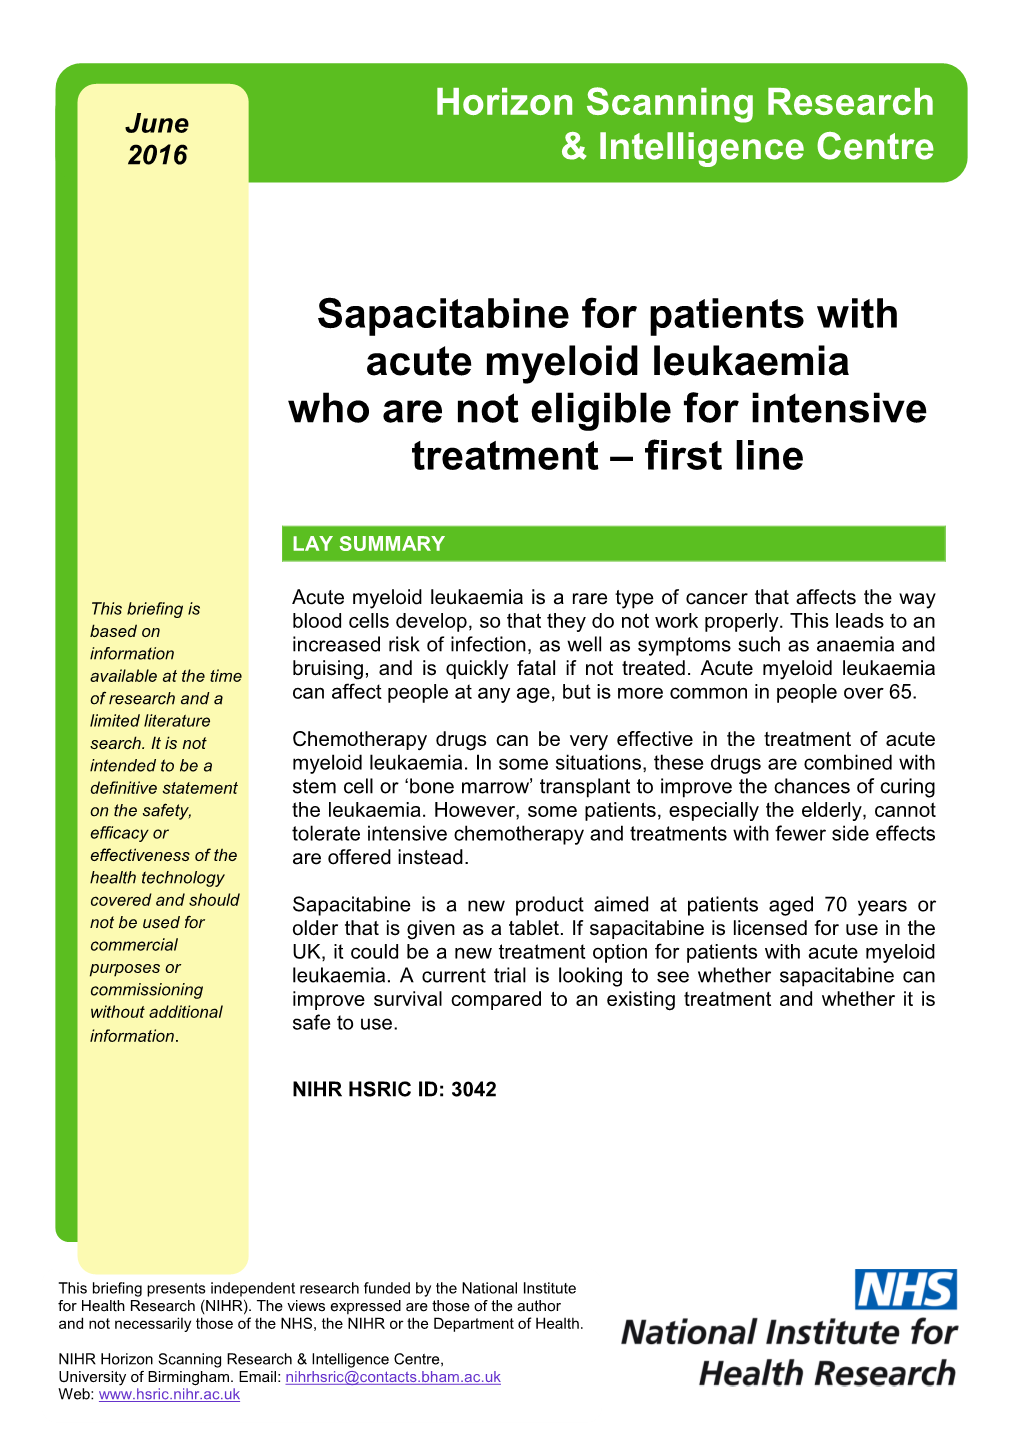 Sapacitabine for Patients with Acute Myeloid Leukaemia Who Are Not Eligible for Intensive Treatment – First Line